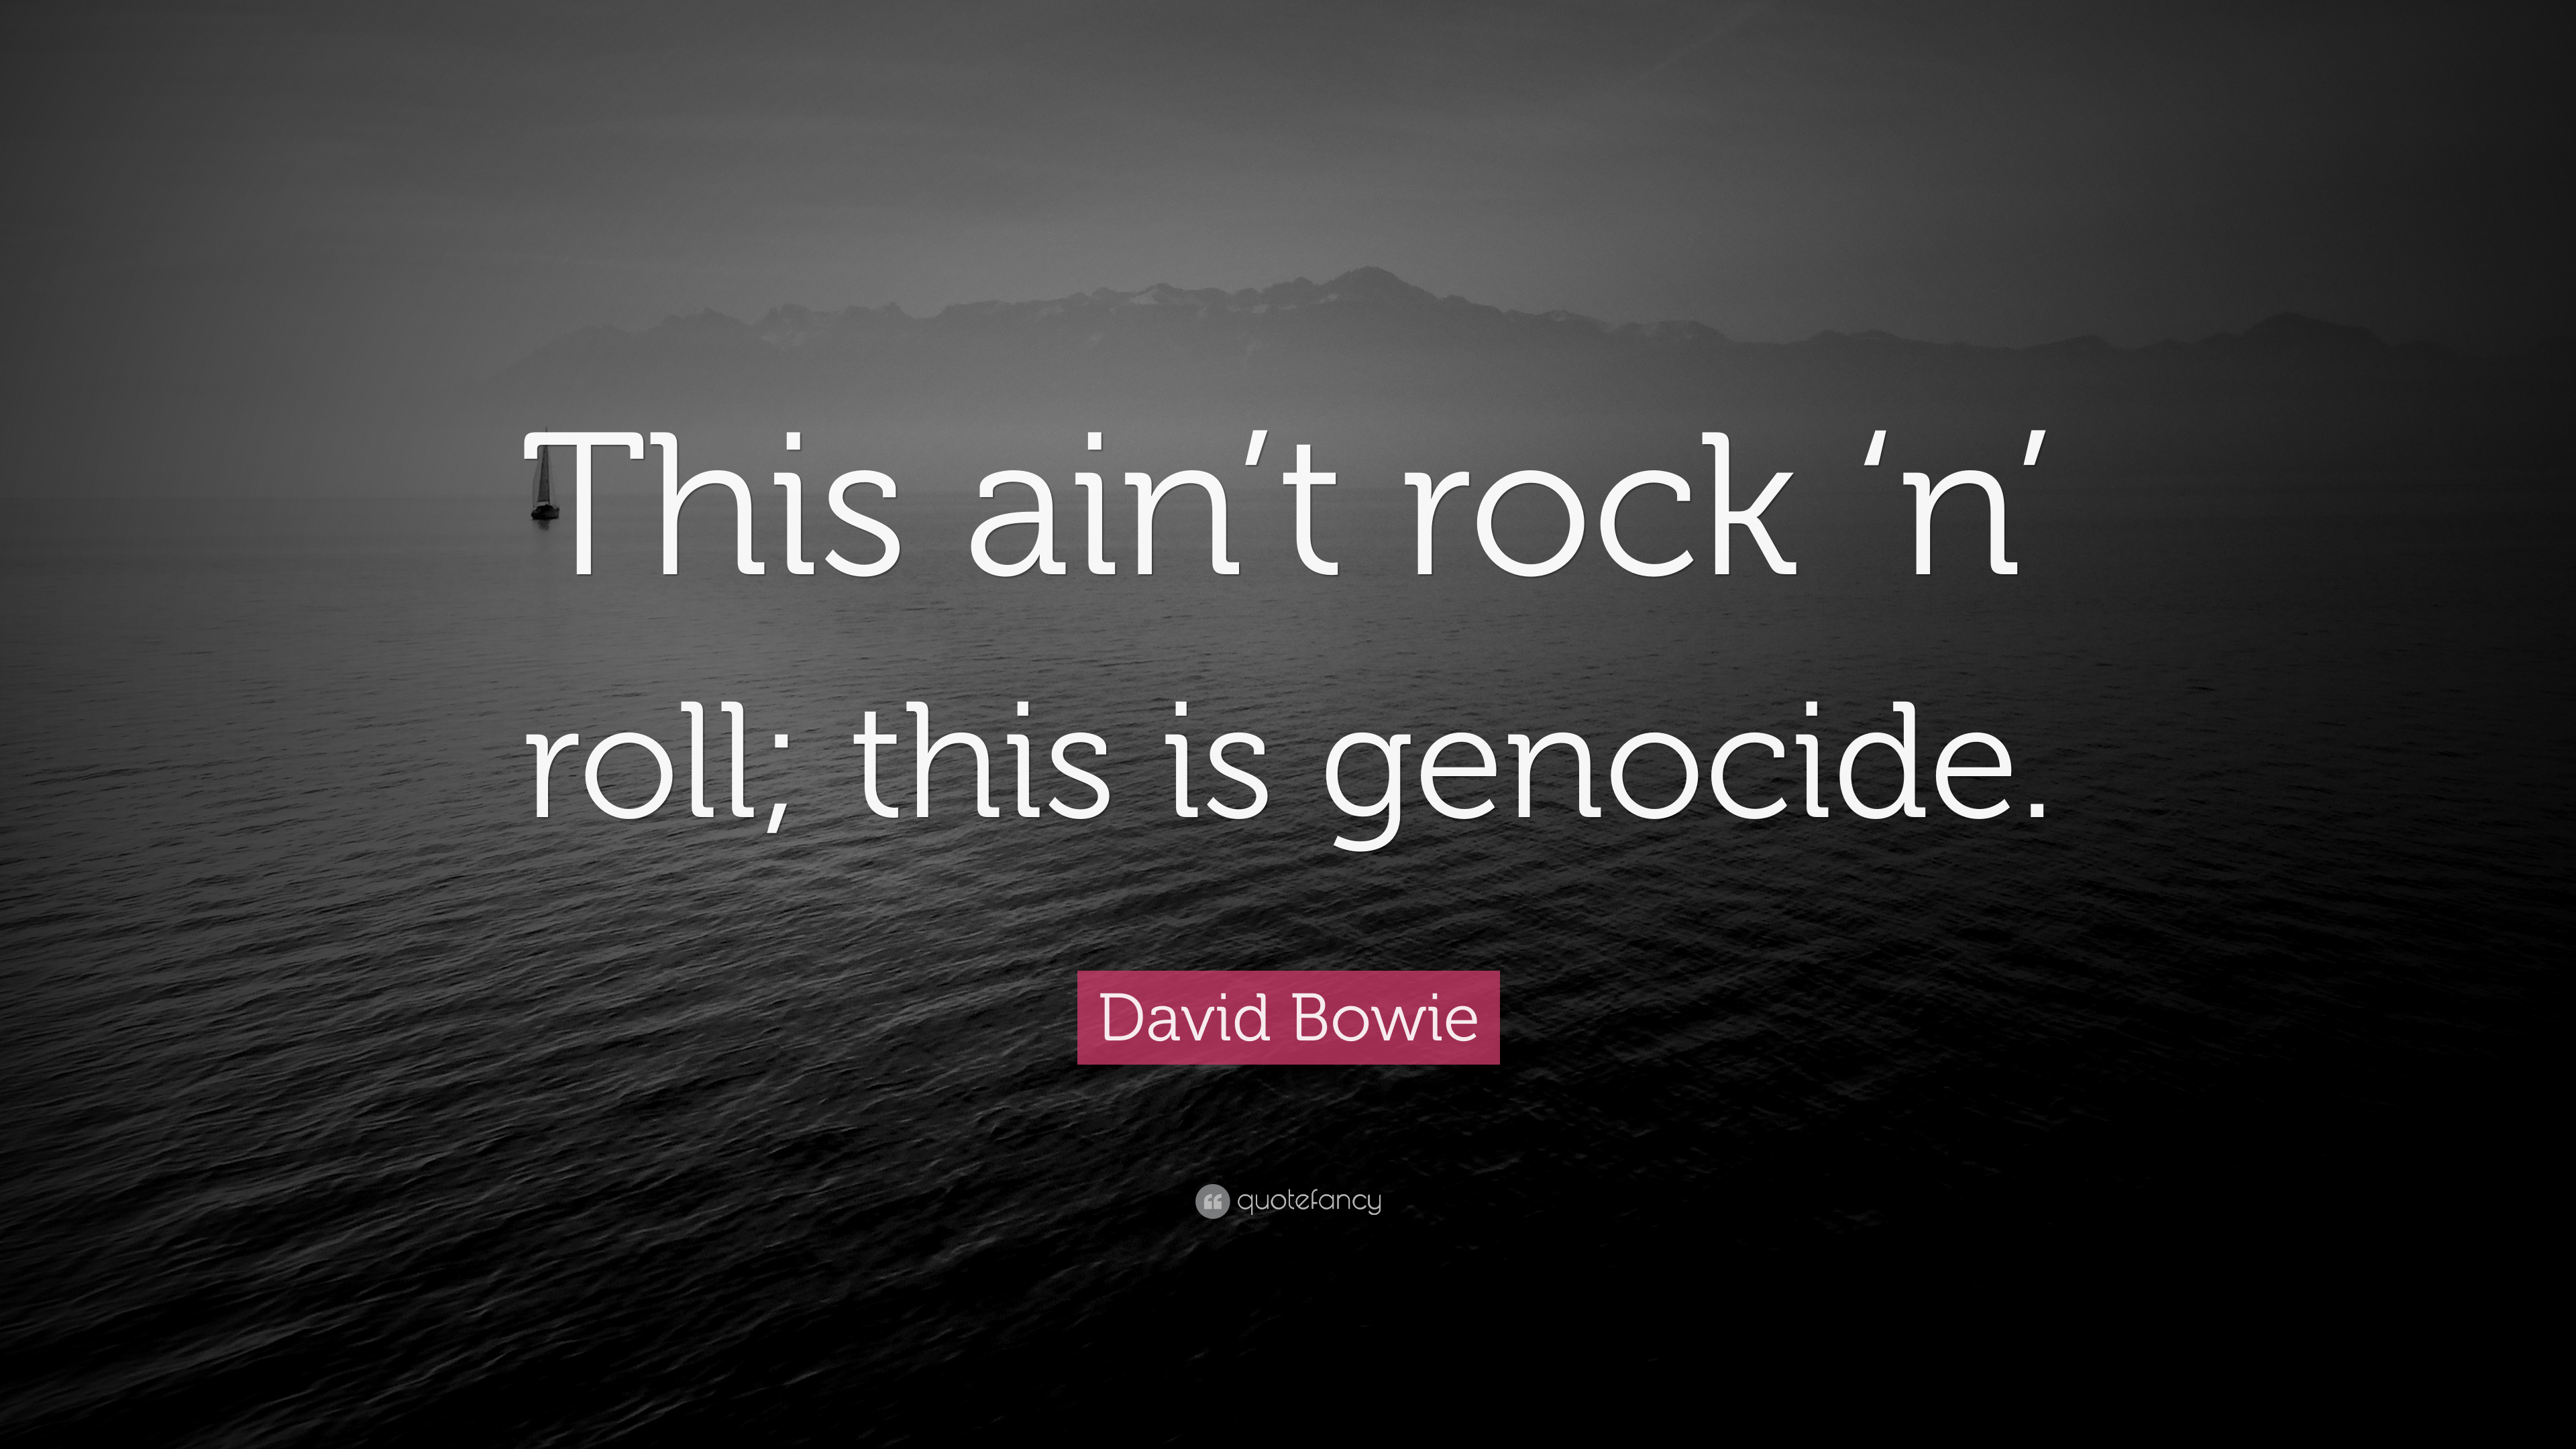 David Bowie Quote - Spiritual Quotes - HD Wallpaper 